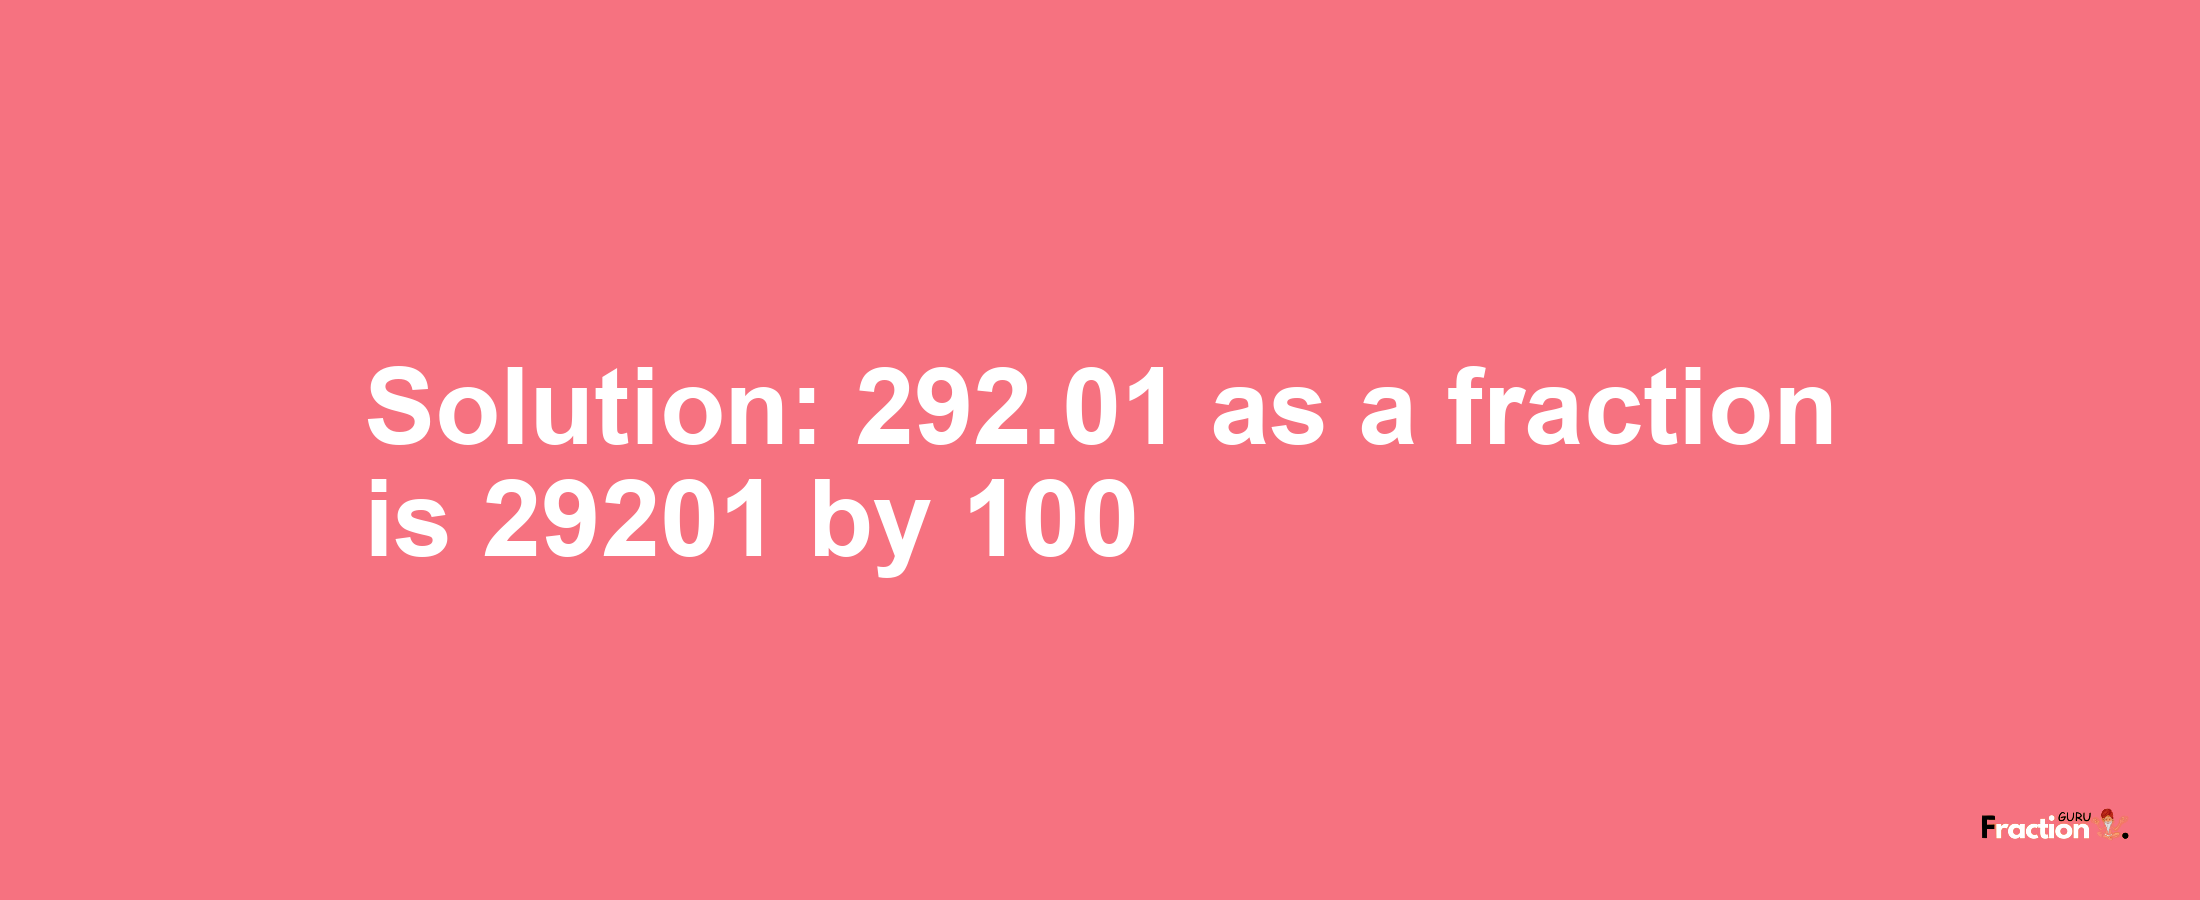 Solution:292.01 as a fraction is 29201/100